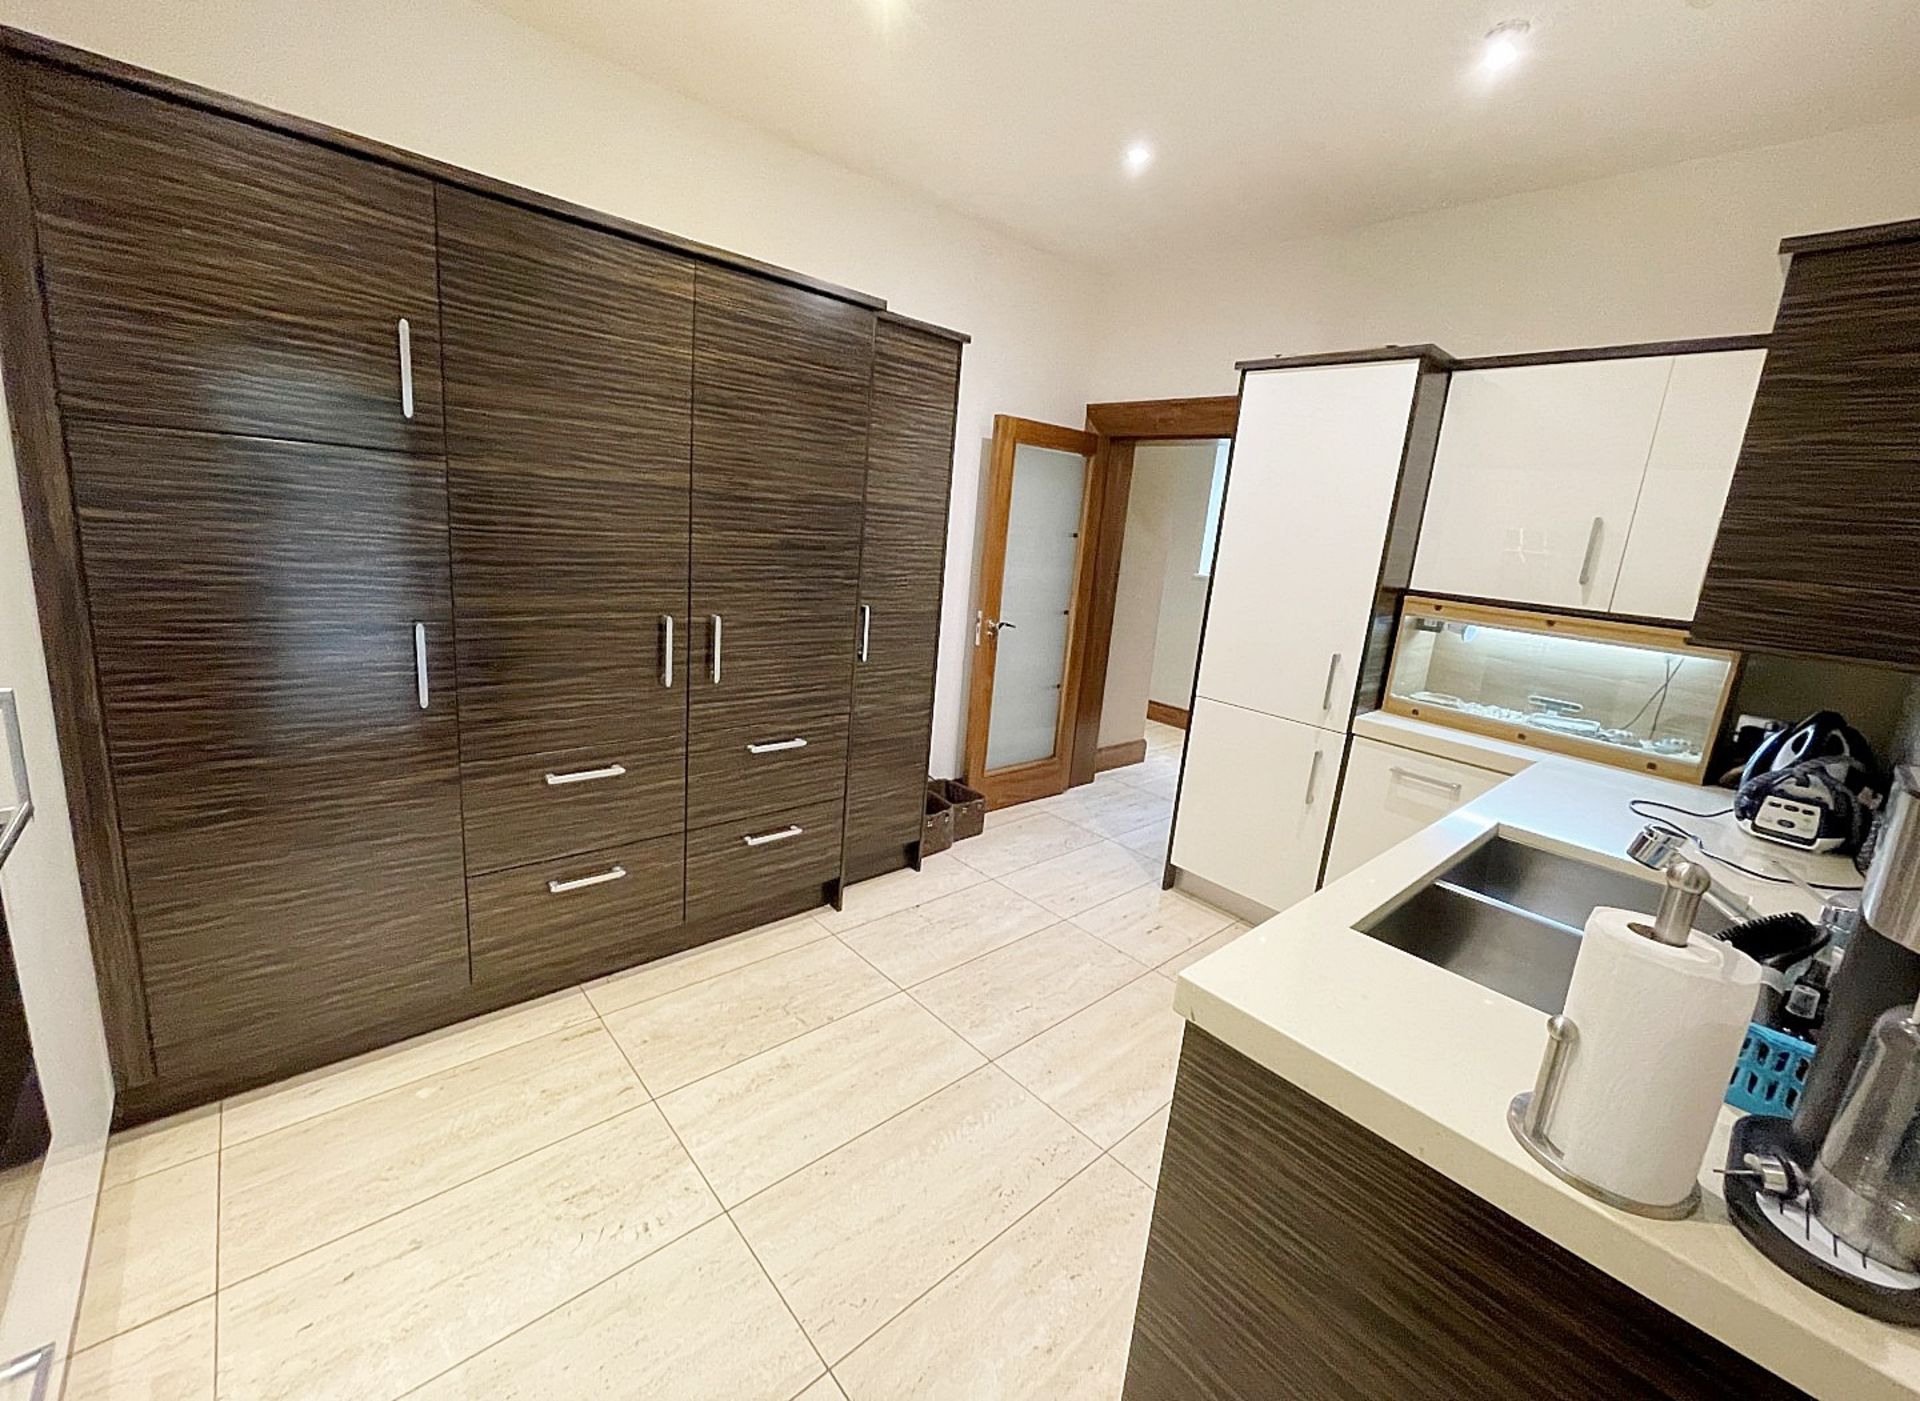 1 x Bespoke Fitted Mowlem & Co Kitchen With Miele and Sub Zero Appliances & Granite Worktops - - Image 2 of 54